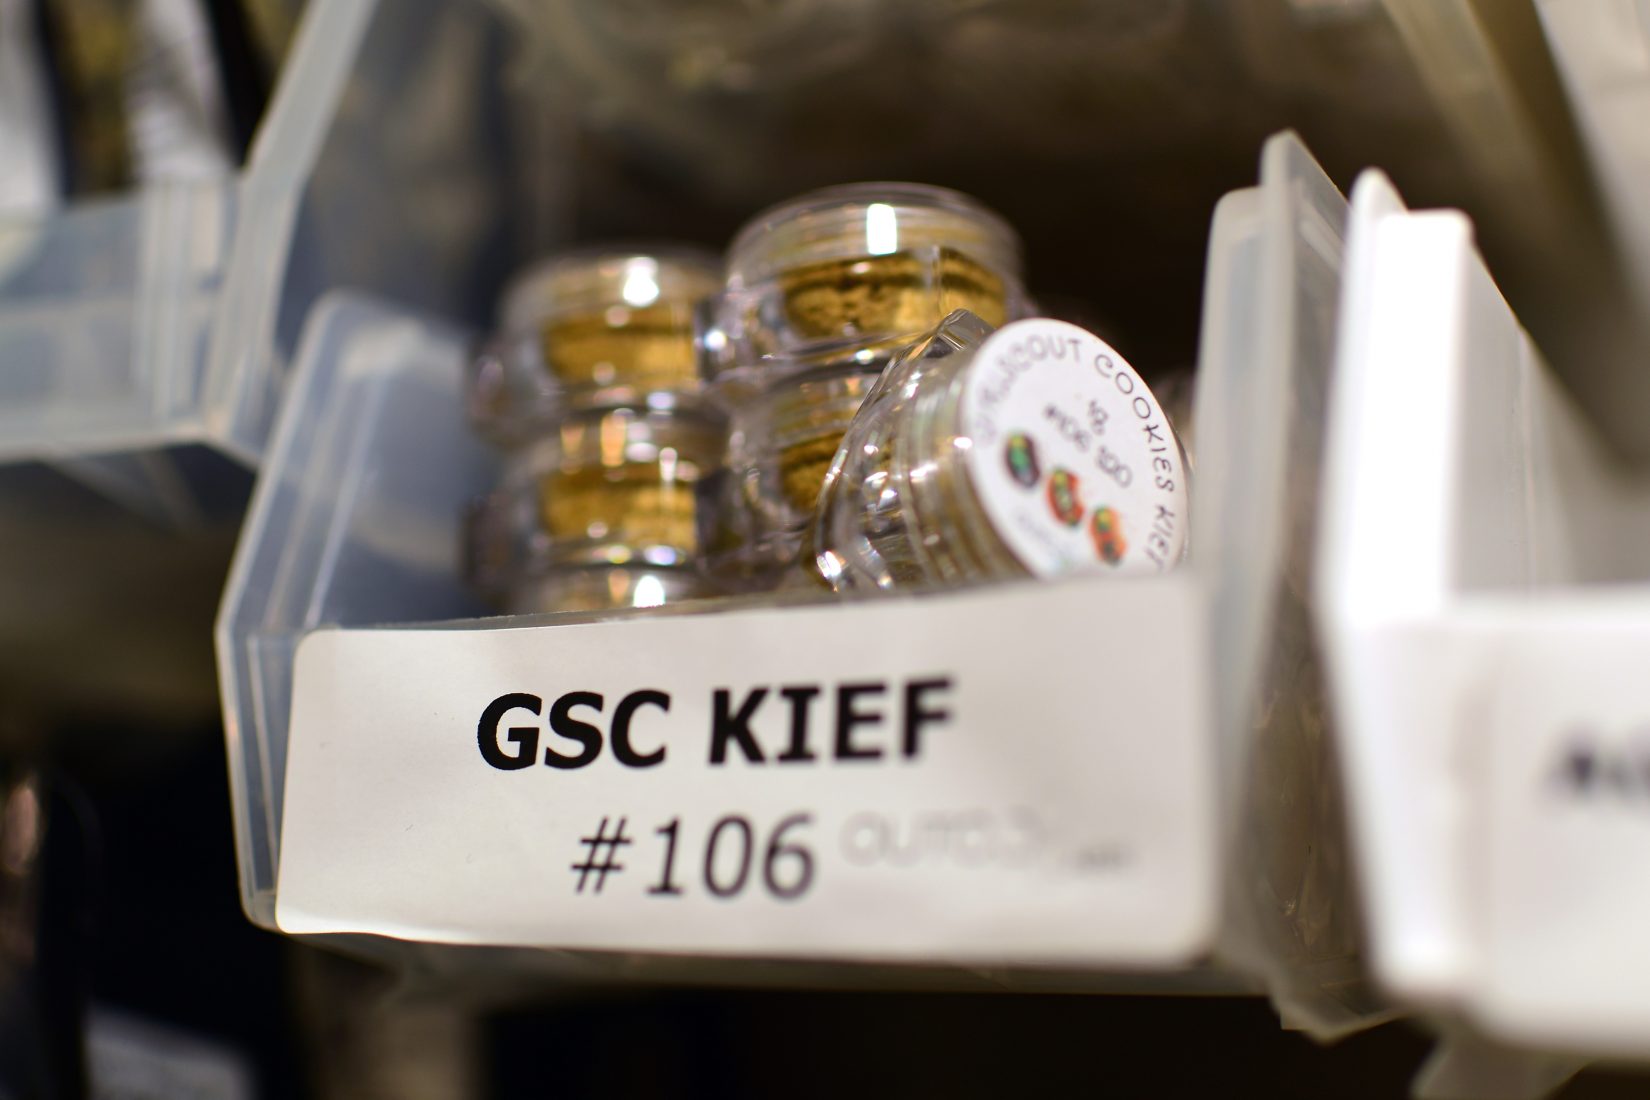 Grams of kief are prepackaged for sale at the Outliers Collective in San Diego County, California in October 2016. (Vince Chandler, The Cannabist)